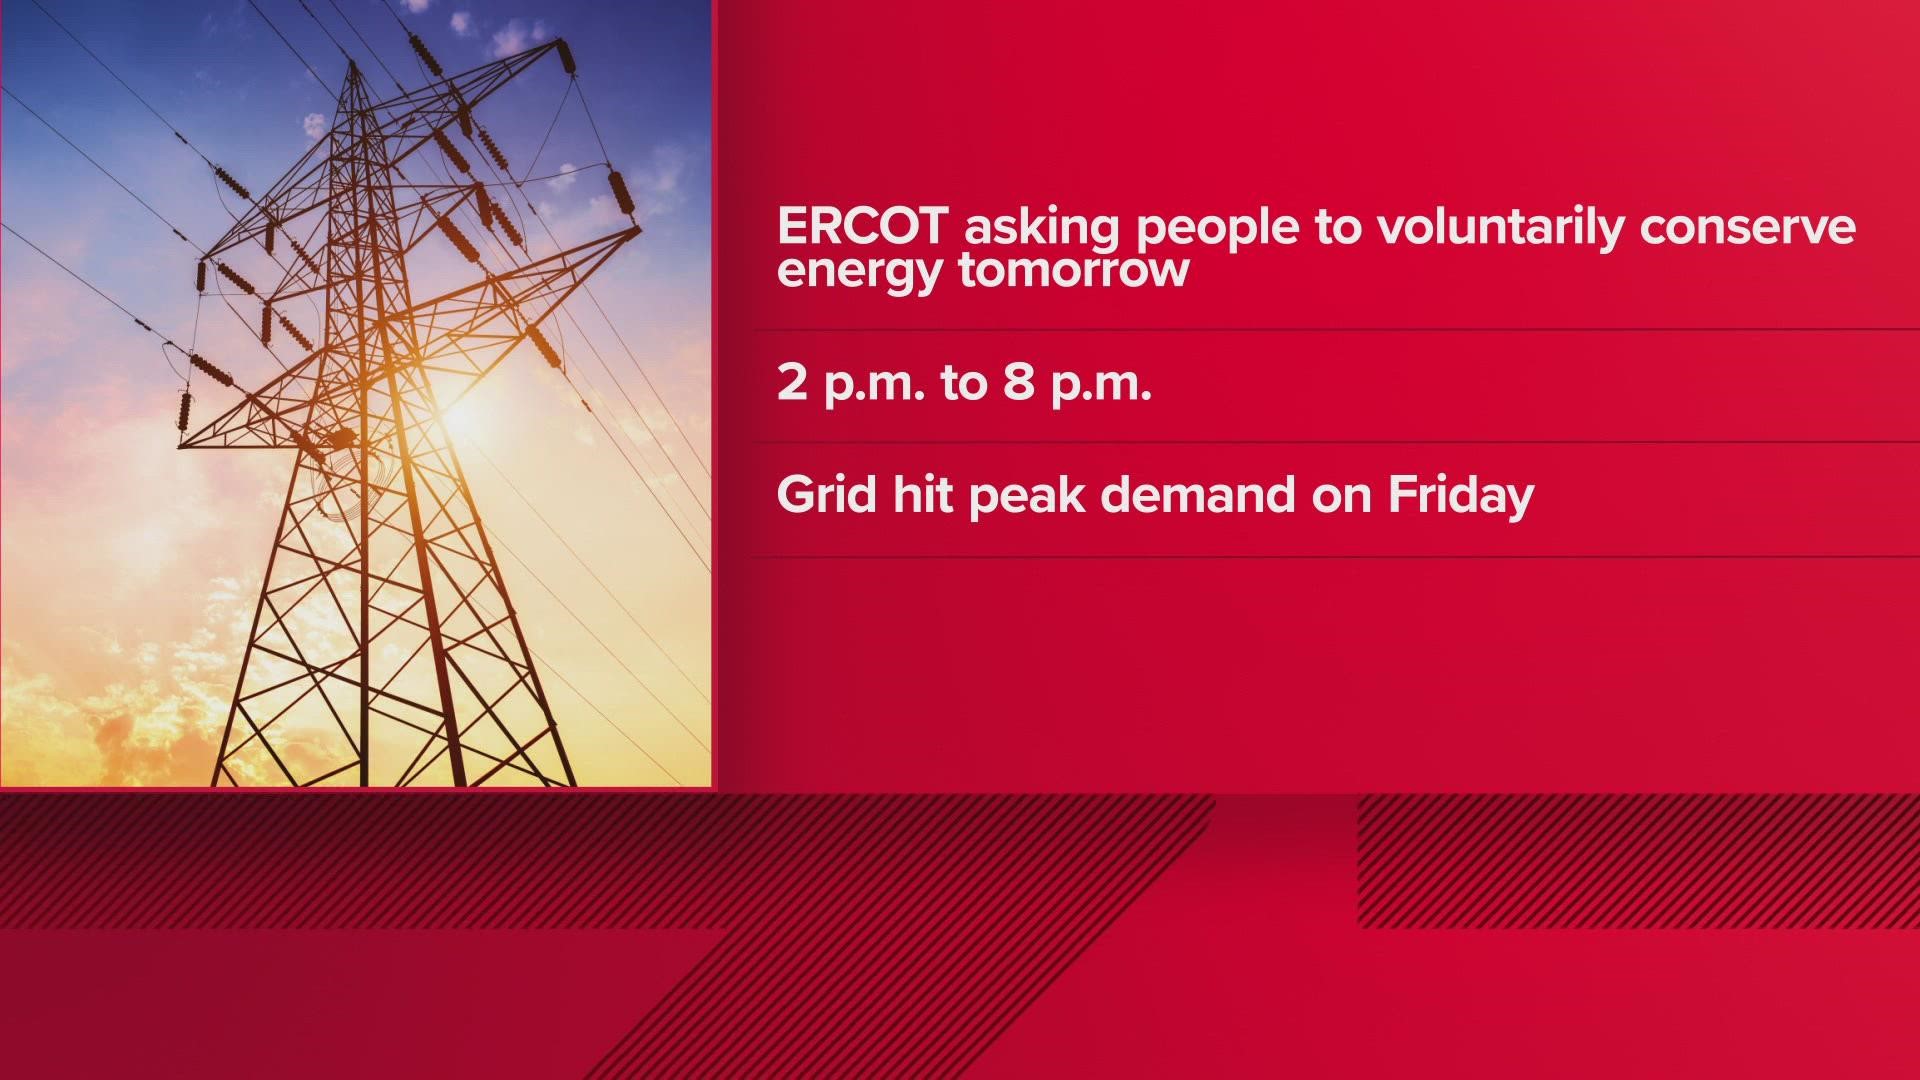 The operator of the Texas electric grid issued an appeal for energy conservation on Monday from 2 p.m. to 8 p.m.